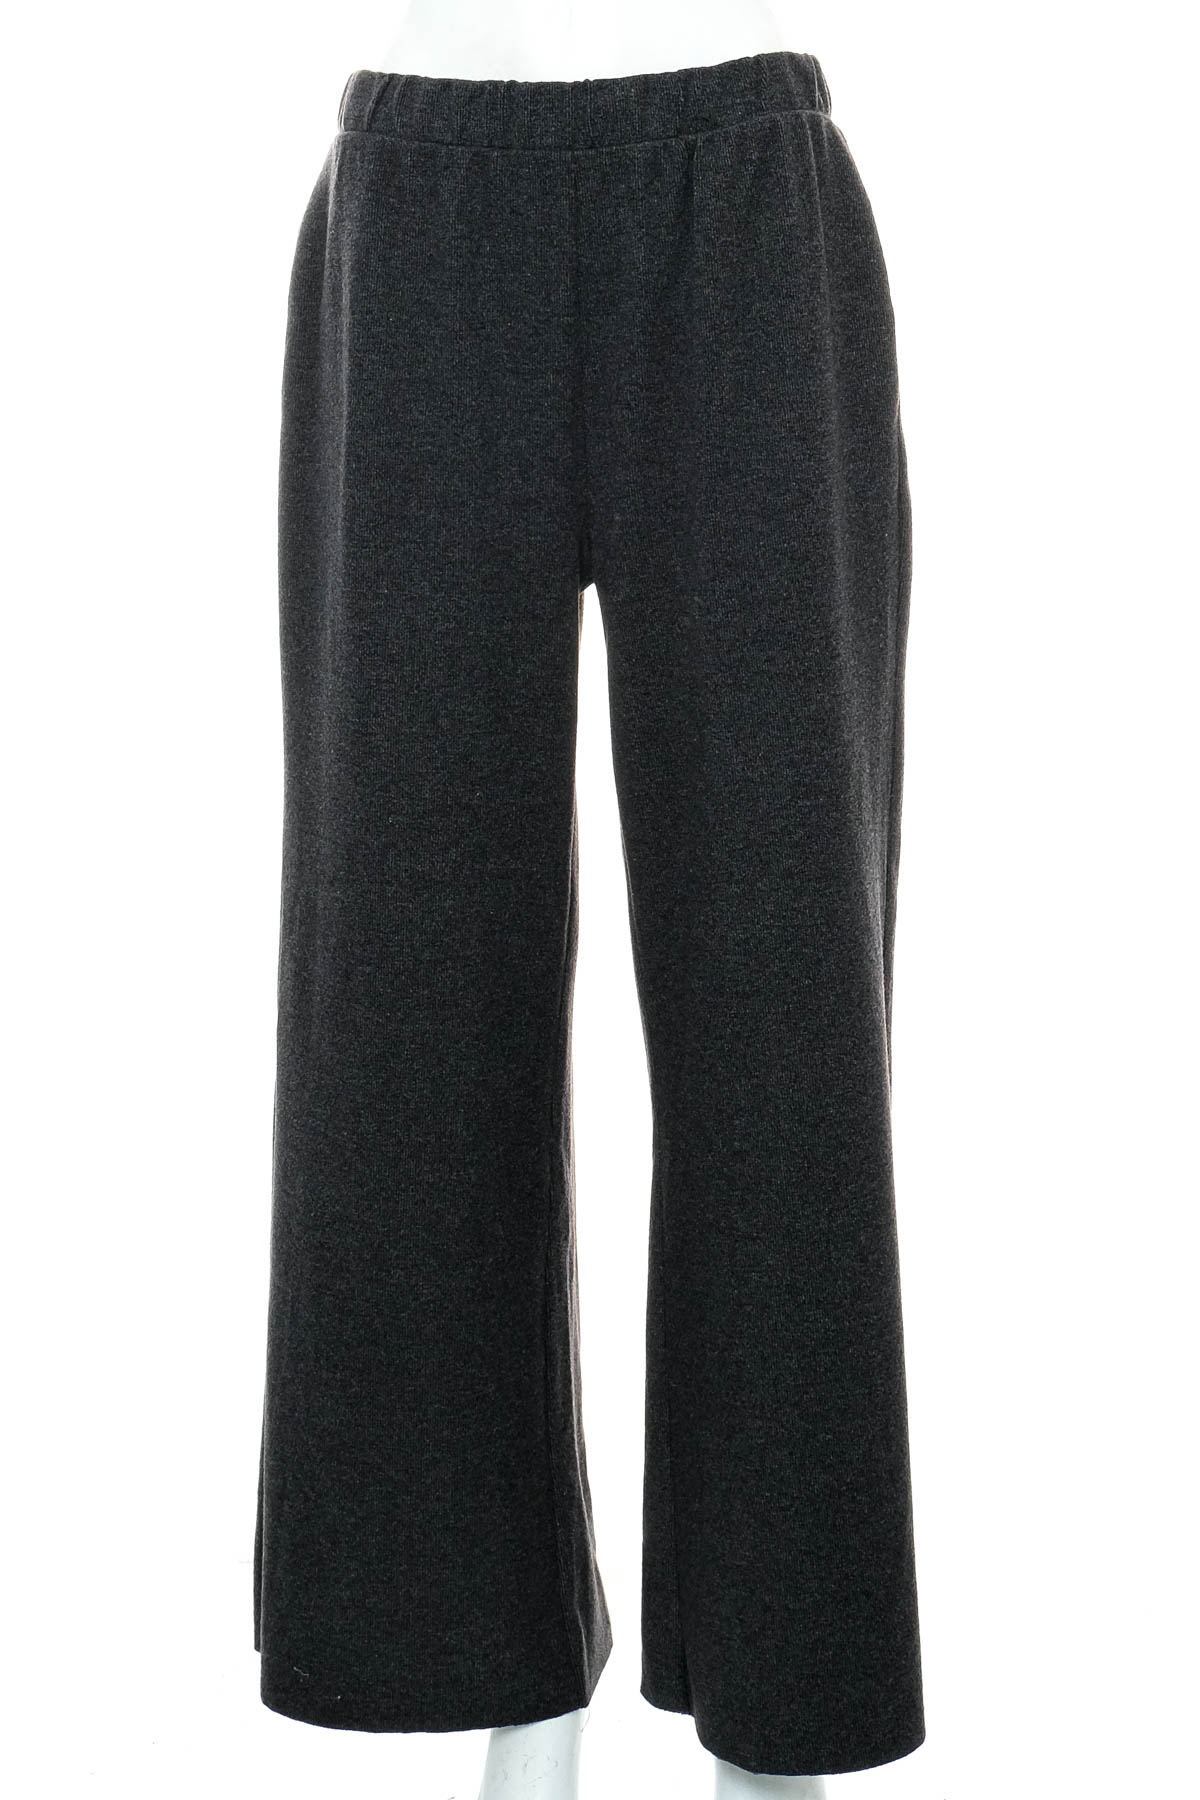 Women's trousers - MVN THE LABEL - 0